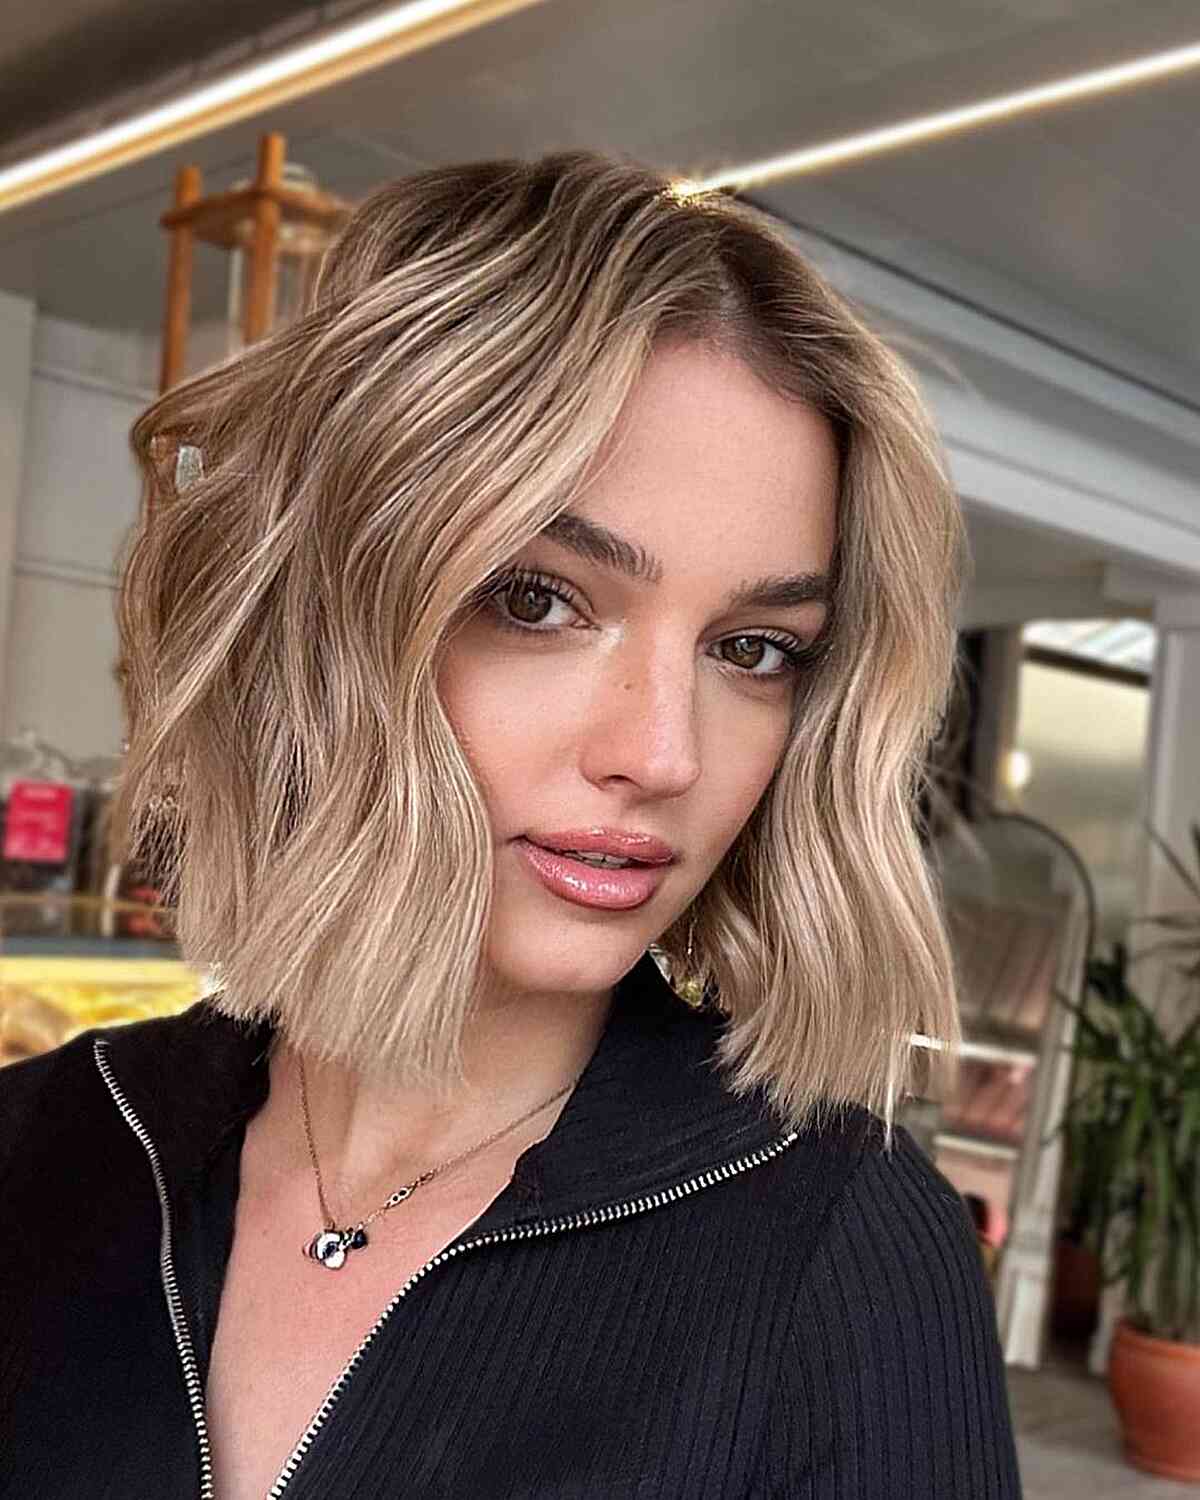 25 Stunning Dusting Haircuts for Healthy and Stylish Hair